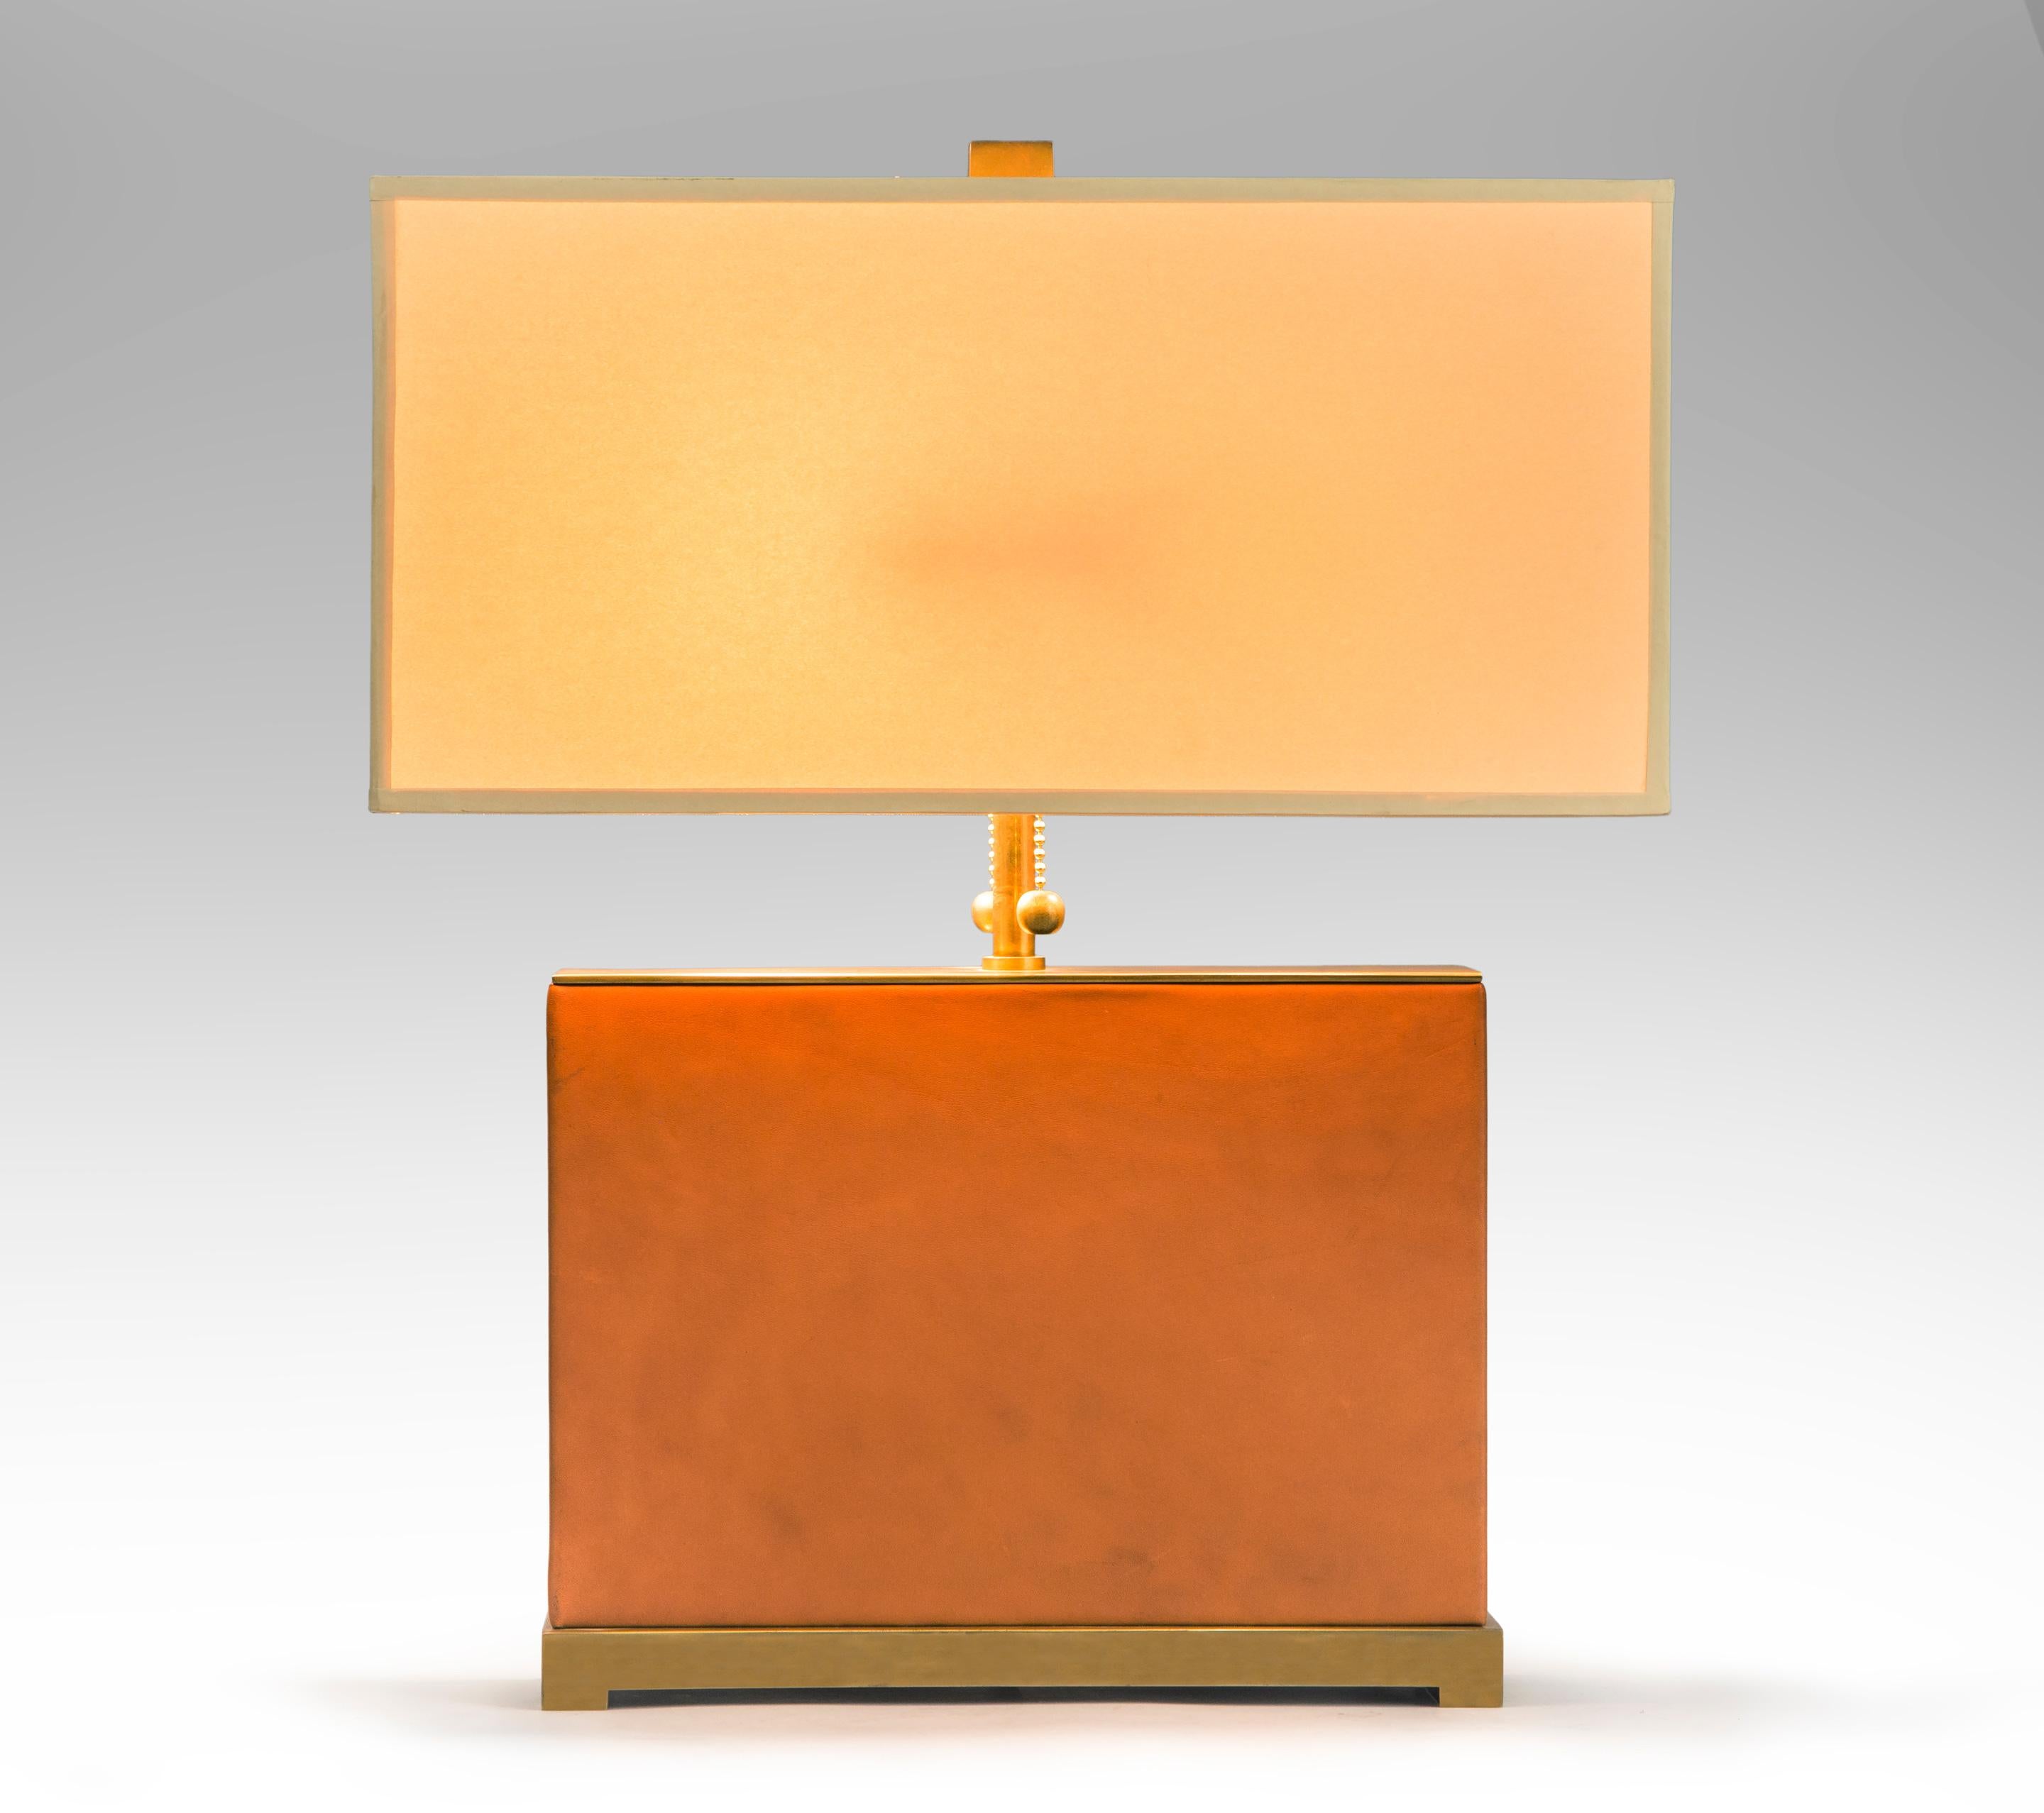 Brass and leather lamp,
late 20th century.
A discretely beautiful lamp crafted with skill and luxurious materials. The rectangular leather center raised on a footed brass platform, rectangular shade included. UL listed.